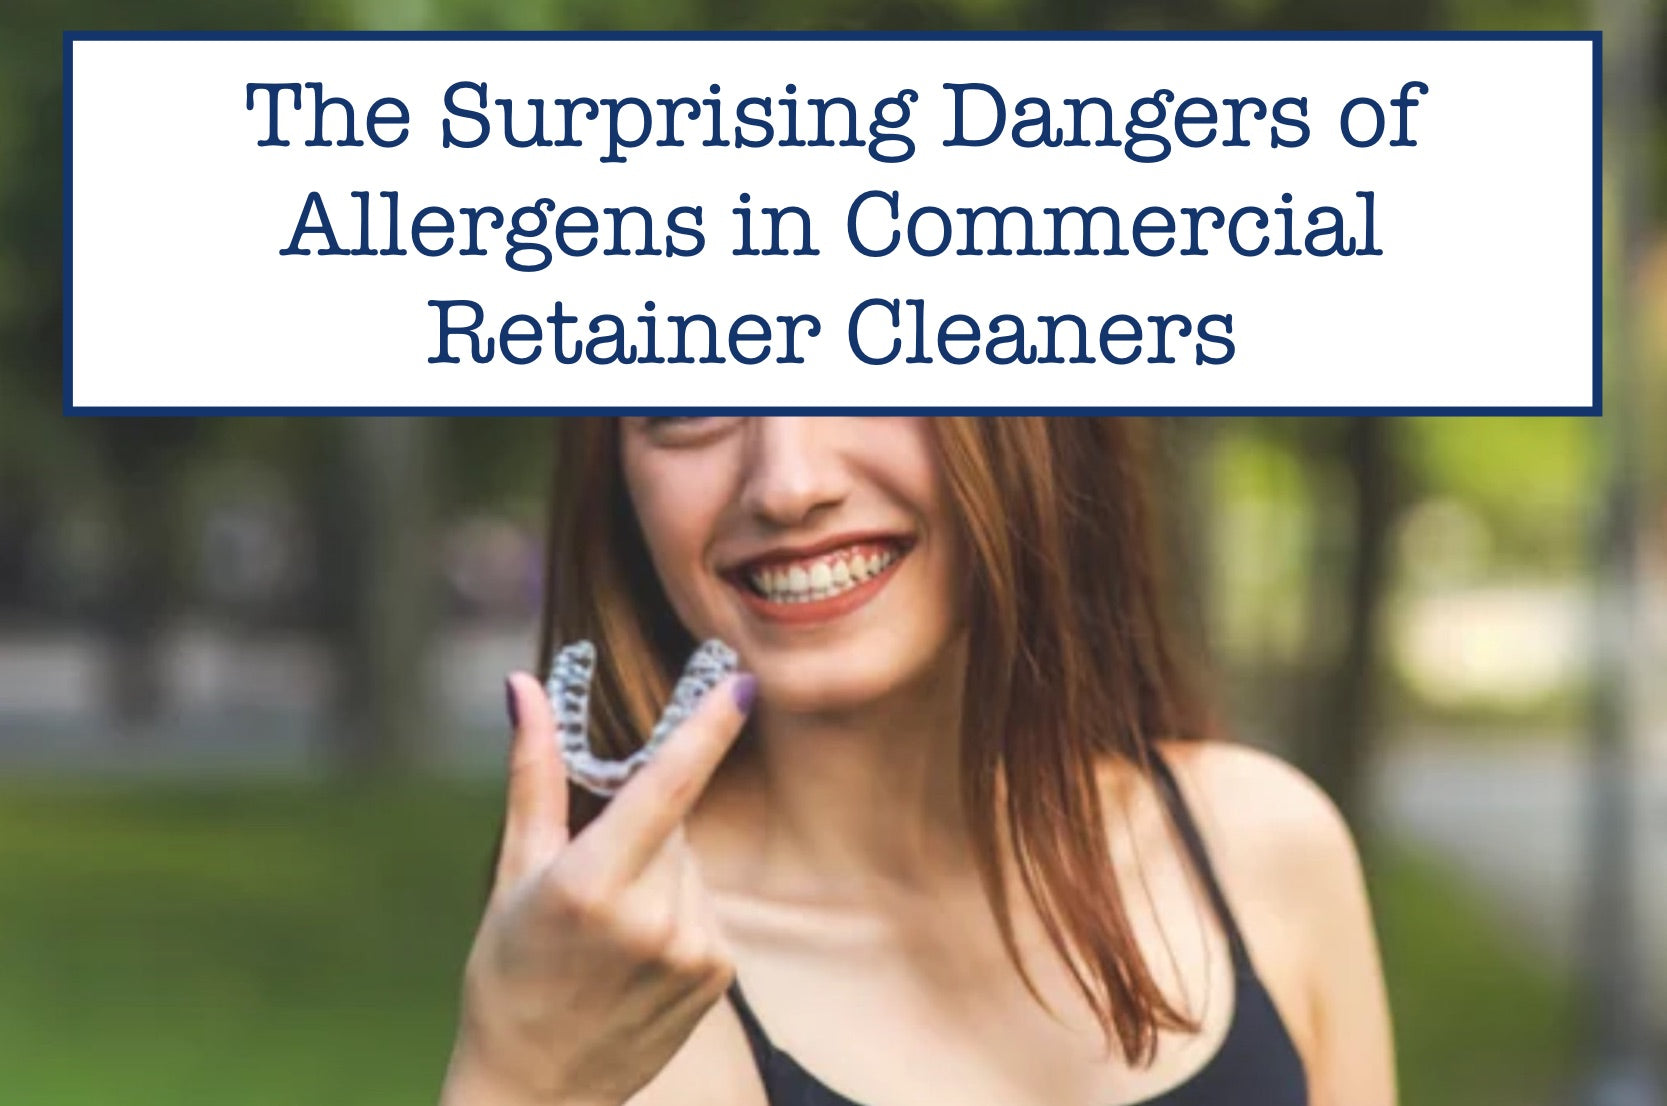 The Surprising Dangers of Allergens in Commercial Retainer Cleaners